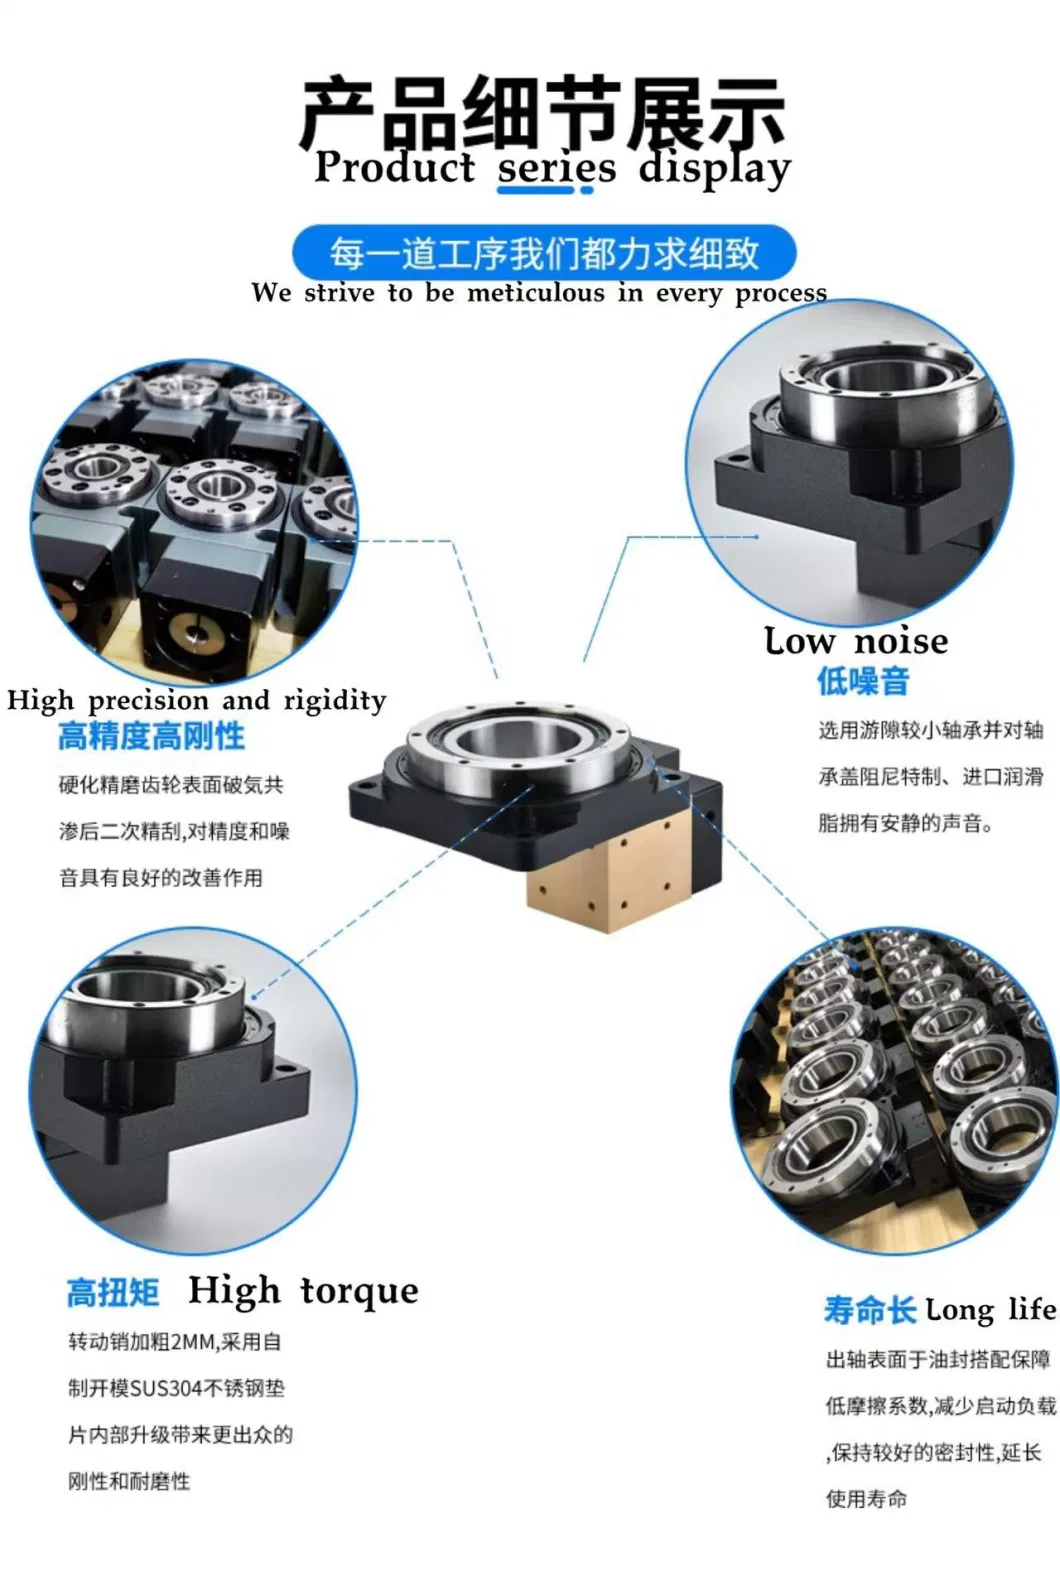 Precision Hollow Rotating Platform Reducer Electric Rotary Table